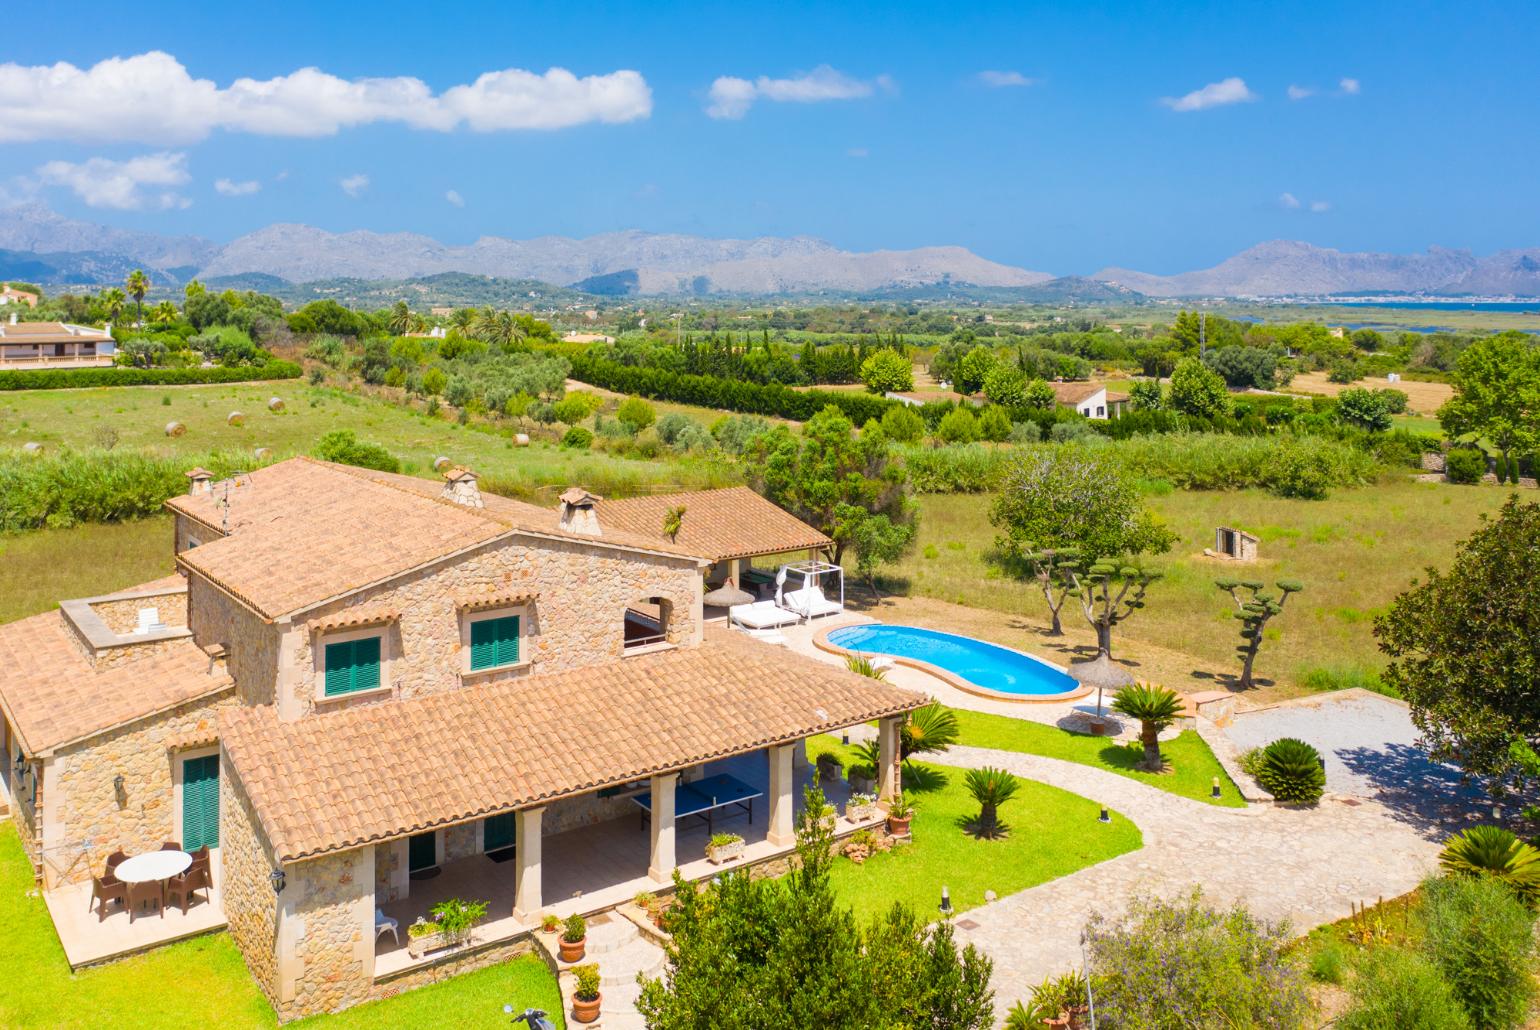 Beautiful villa with private pool, terraces, and garden